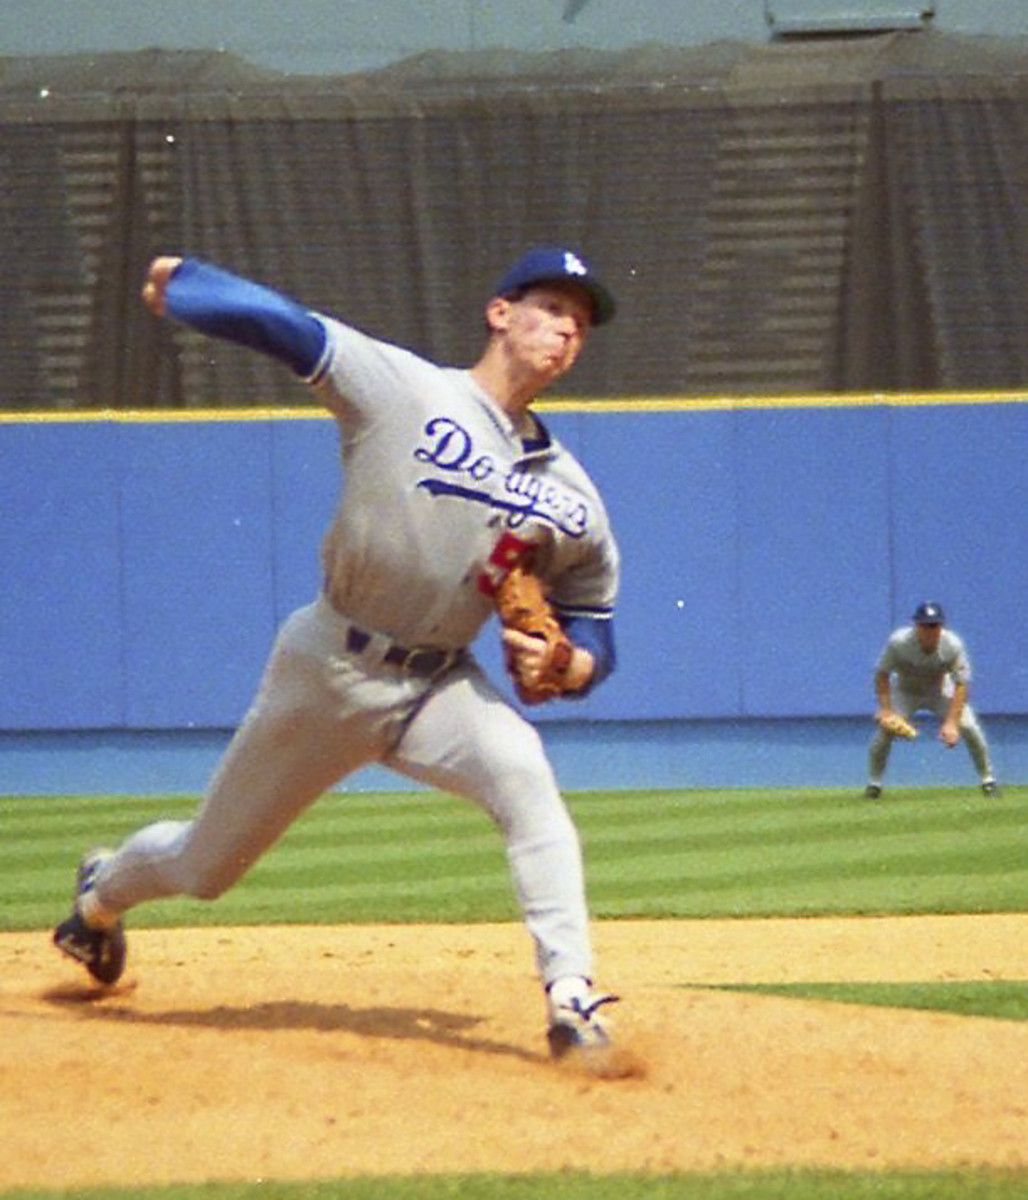 Orel Hershiser in 1993 when he posted a .356 batting average.